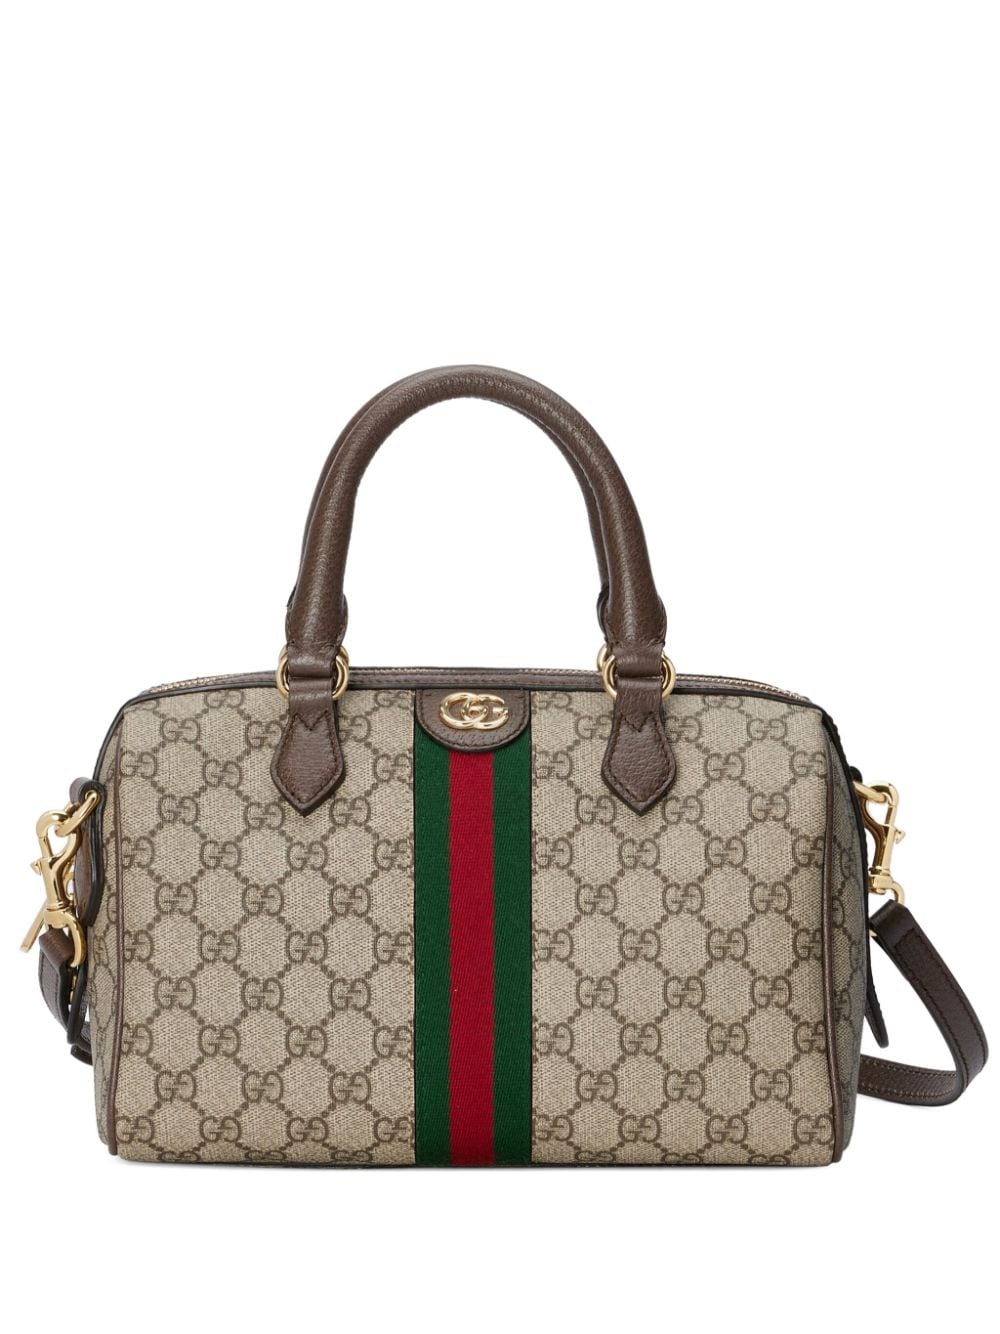 Gucci Small Ophidia Gg Tote Bag In Neutrals